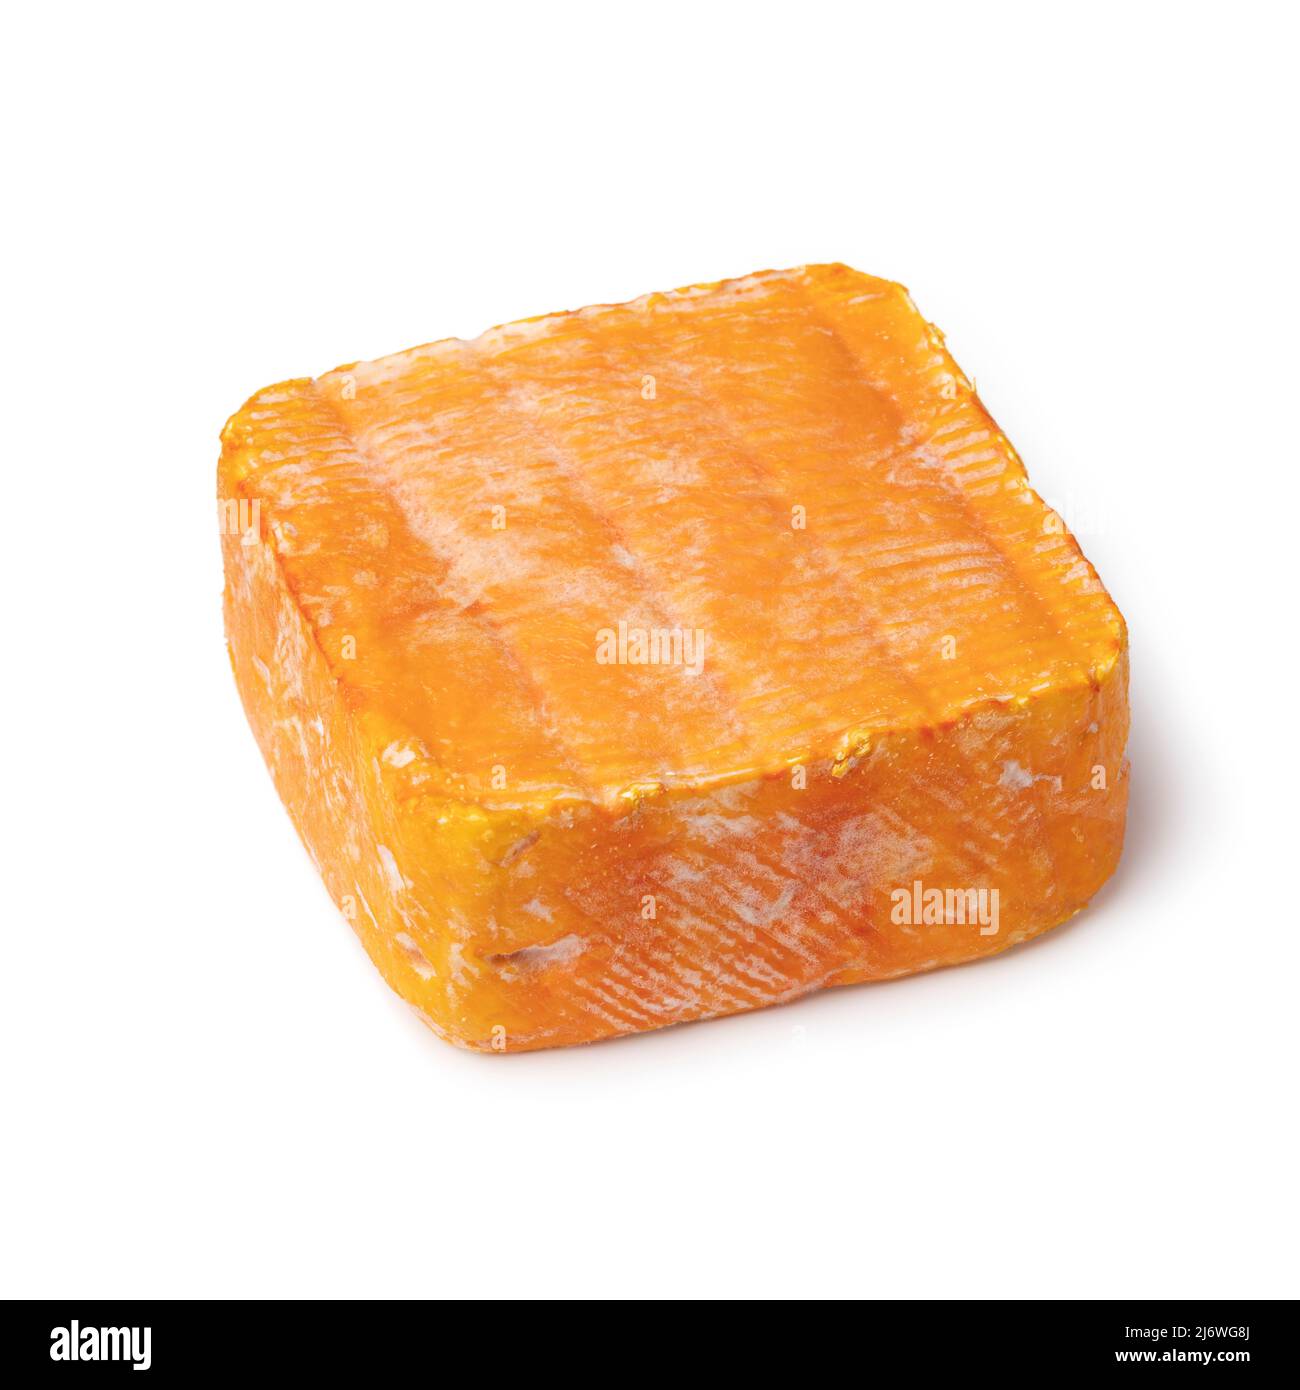 Piece of Le Chandor cheese with an orange crust isolated on white background close up Stock Photo